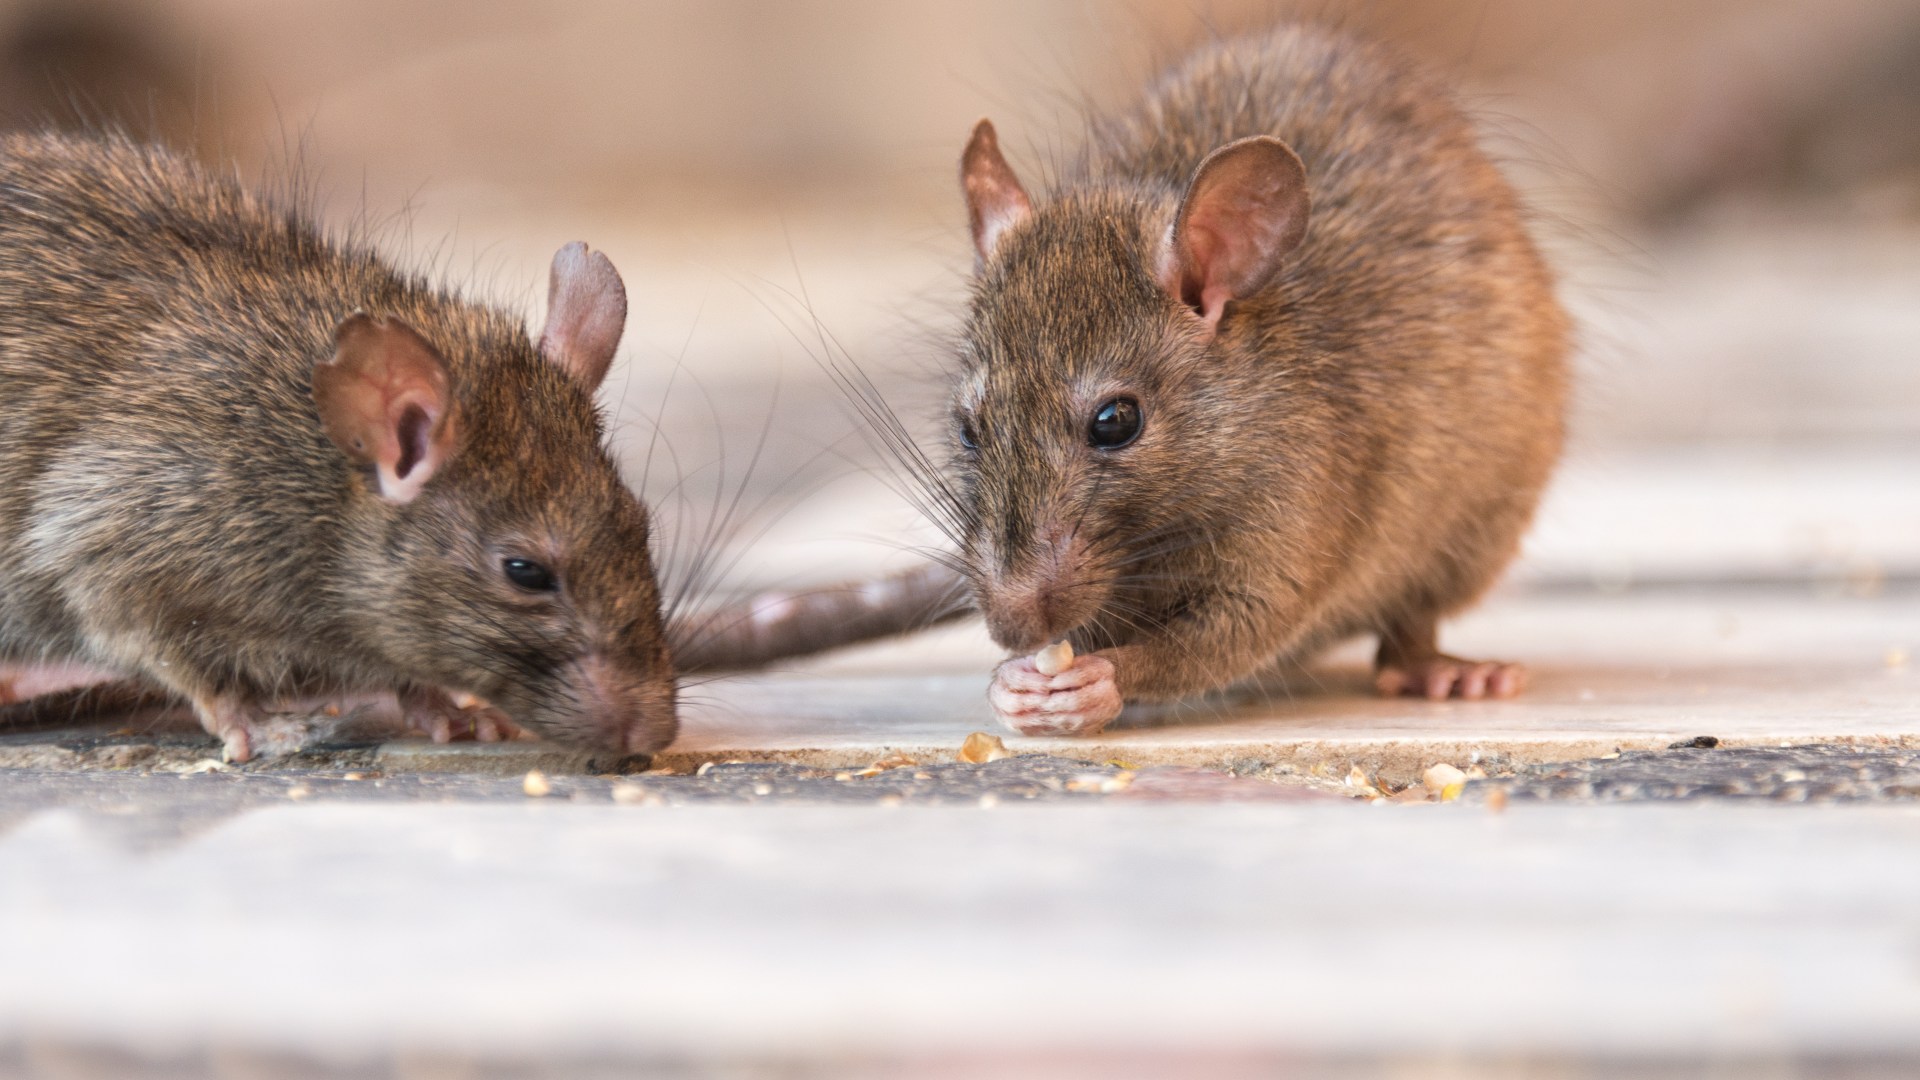 Incurable rat disease kills four people as health officials issue urgent alert amid ‘very serious’ surge in cases [Video]